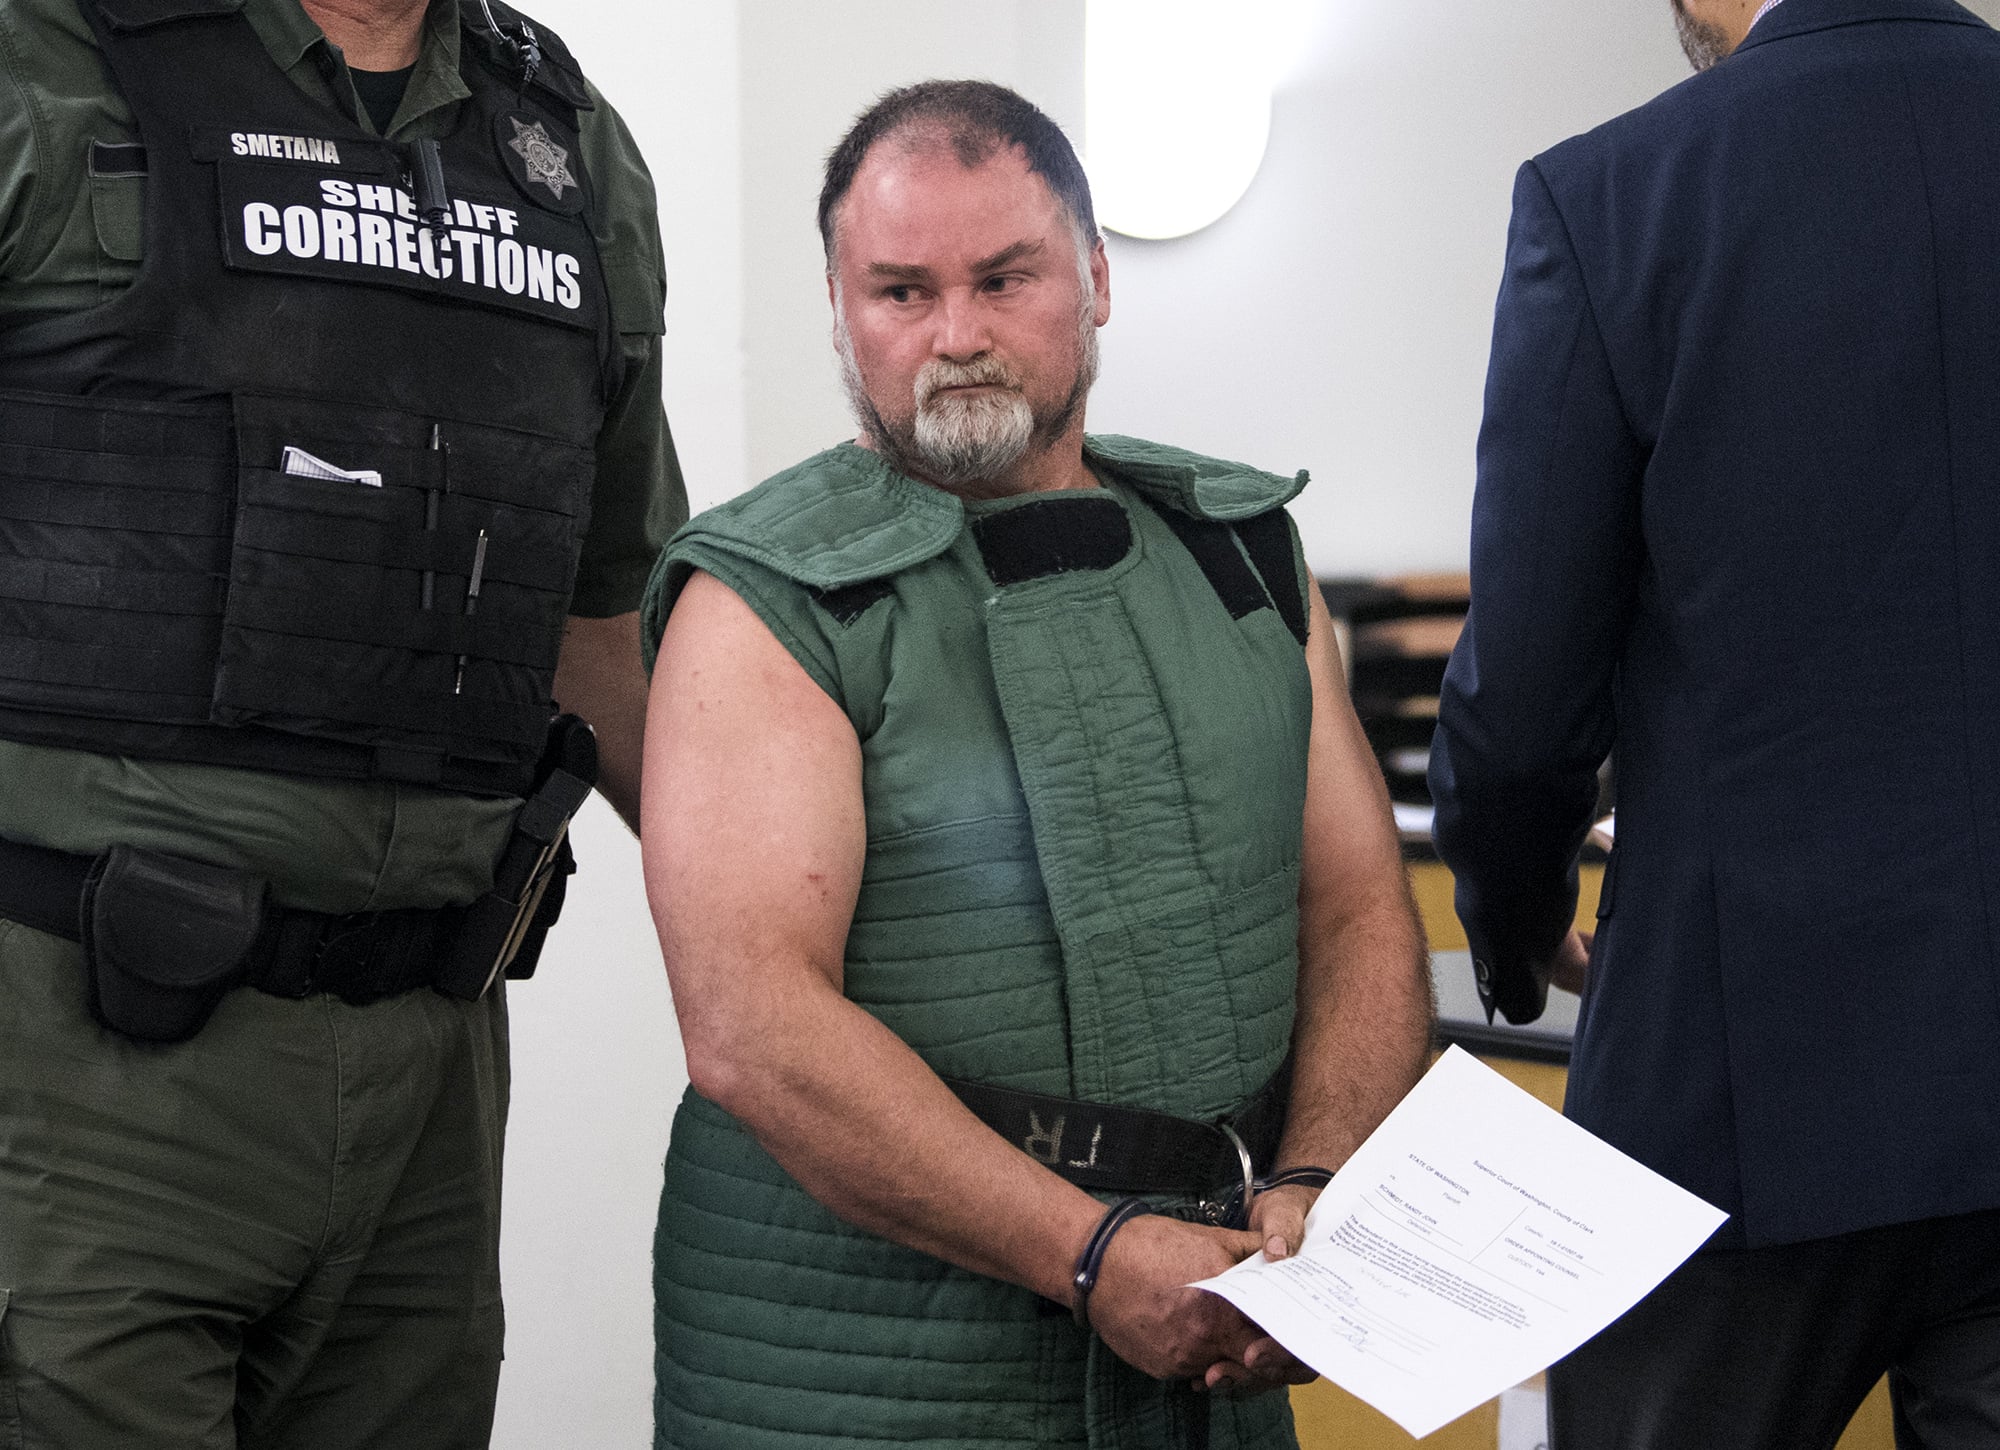 Randy John Schmidt, 47, appears Wednesday, April 10, 2019, in Clark County Superior Court to face an allegation of second-degree murder in the death of 52-year-old Michael Chad Holmes of Camas.